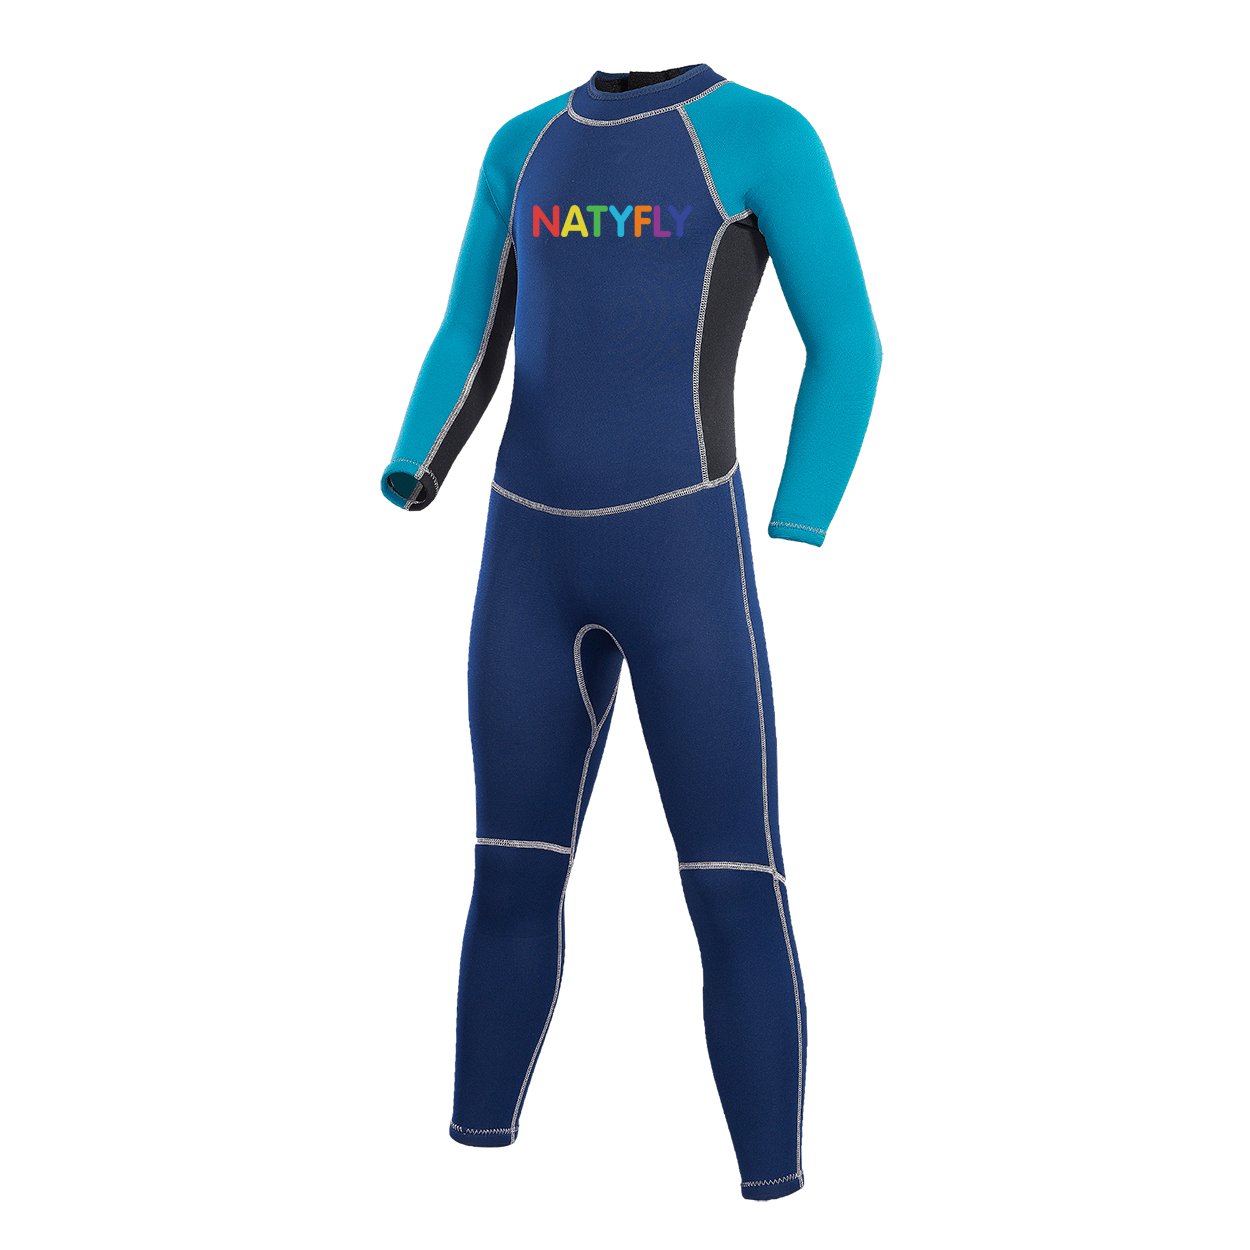 NATYFLY Kids Wetsuit,2mm Neoprene Thermal Swimsuit,Long Sleeve Kids Wet Suits for Swimming Scuba Diving,Full Wetsuit for Girls Boys and Toddler